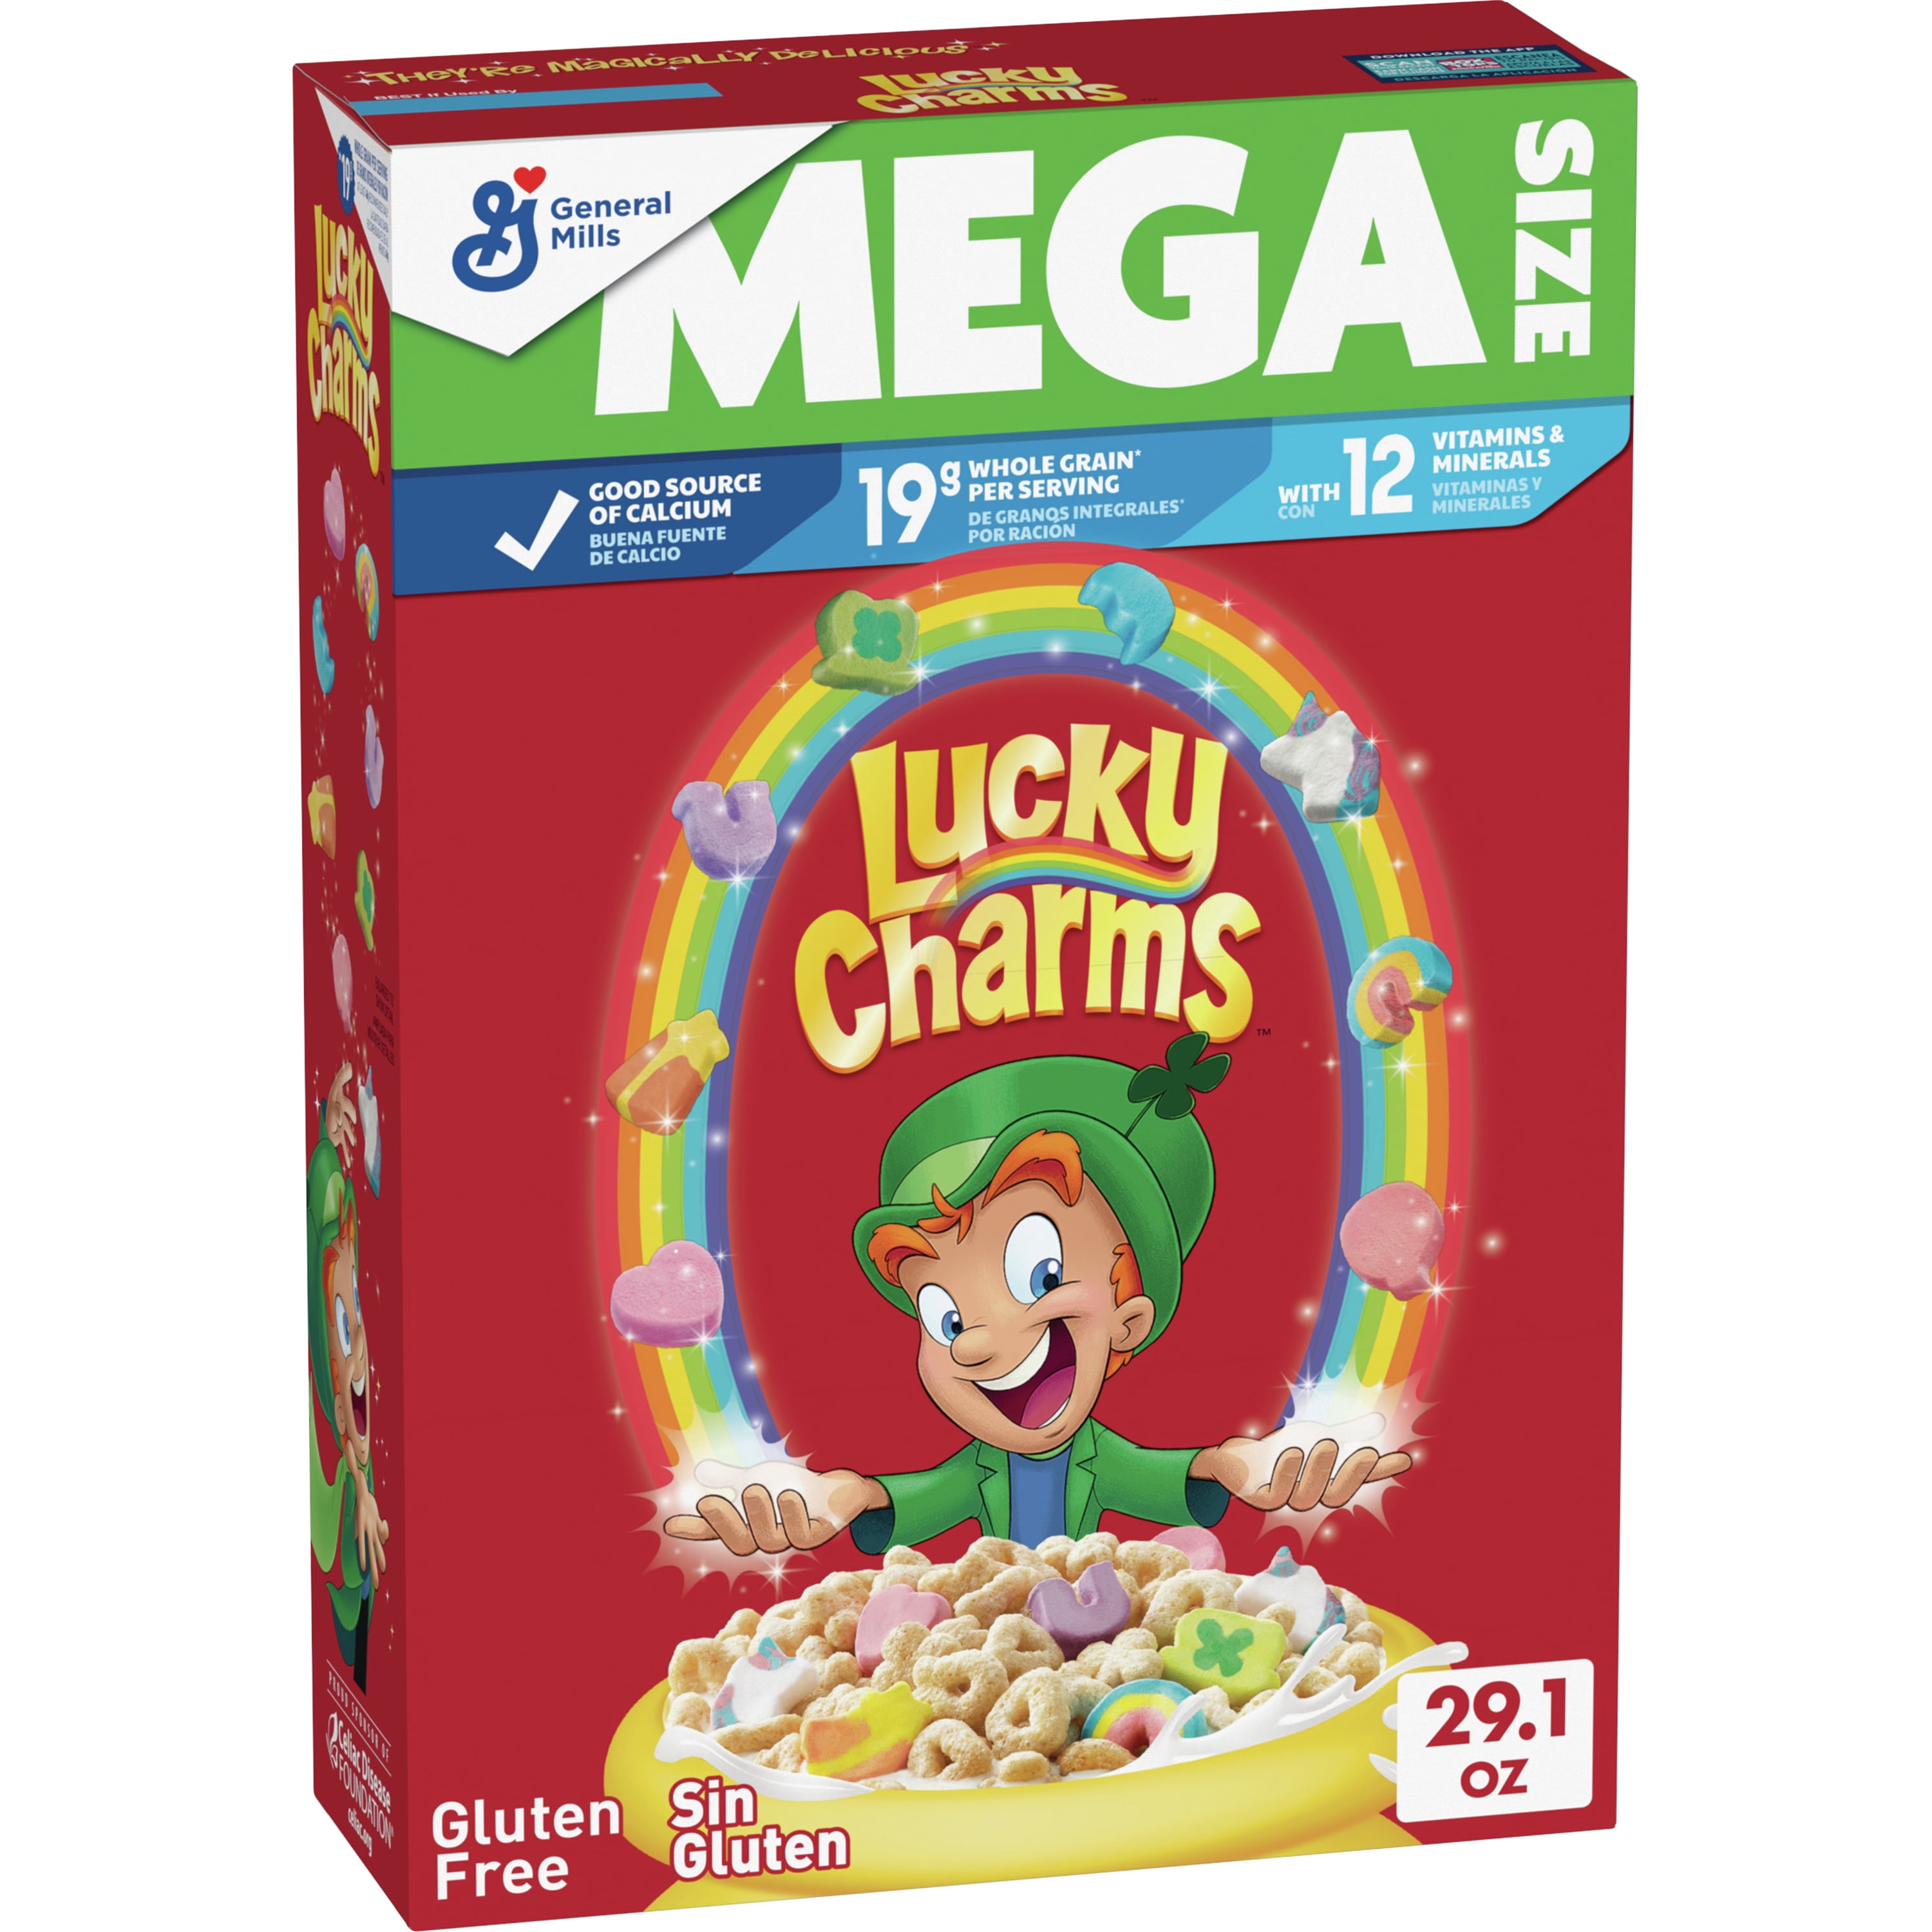 Lucky Charms Marshmallow Breakfast Cereal With Unicorns, 19.3 oz.